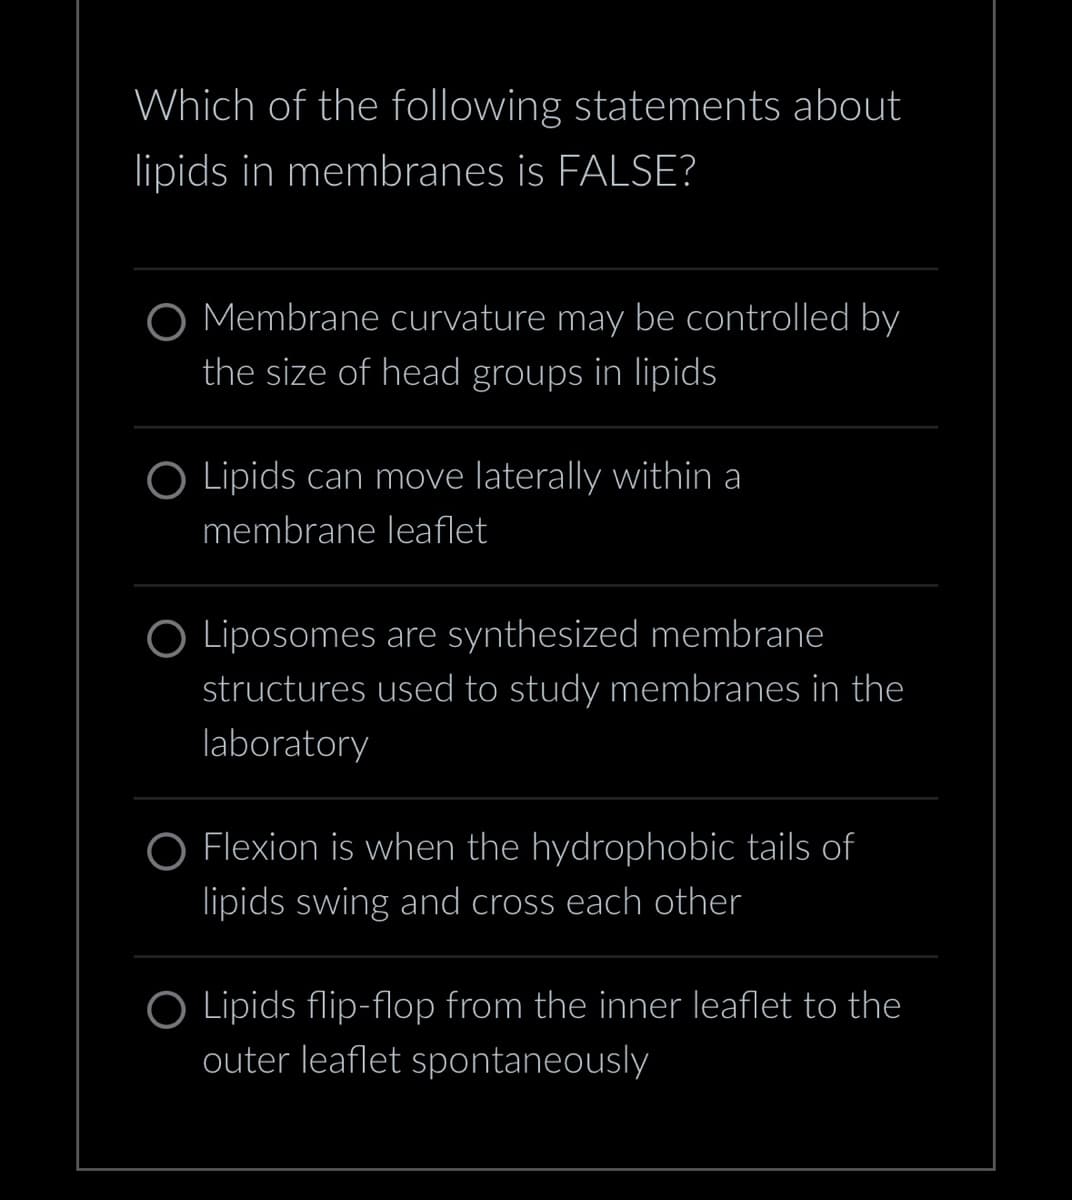 Which of the following statements about
lipids in membranes is FALSE?
O Membrane curvature may be controlled by
the size of head groups in lipids
O Lipids can move laterally within a
membrane leaflet
O Liposomes are synthesized membrane
structures used to study membranes in the
laboratory
Flexion is when the hydrophobic tails of
lipids swing and cross each other
O Lipids flip-flop from the inner leaflet to the
outer leaflet spontaneously